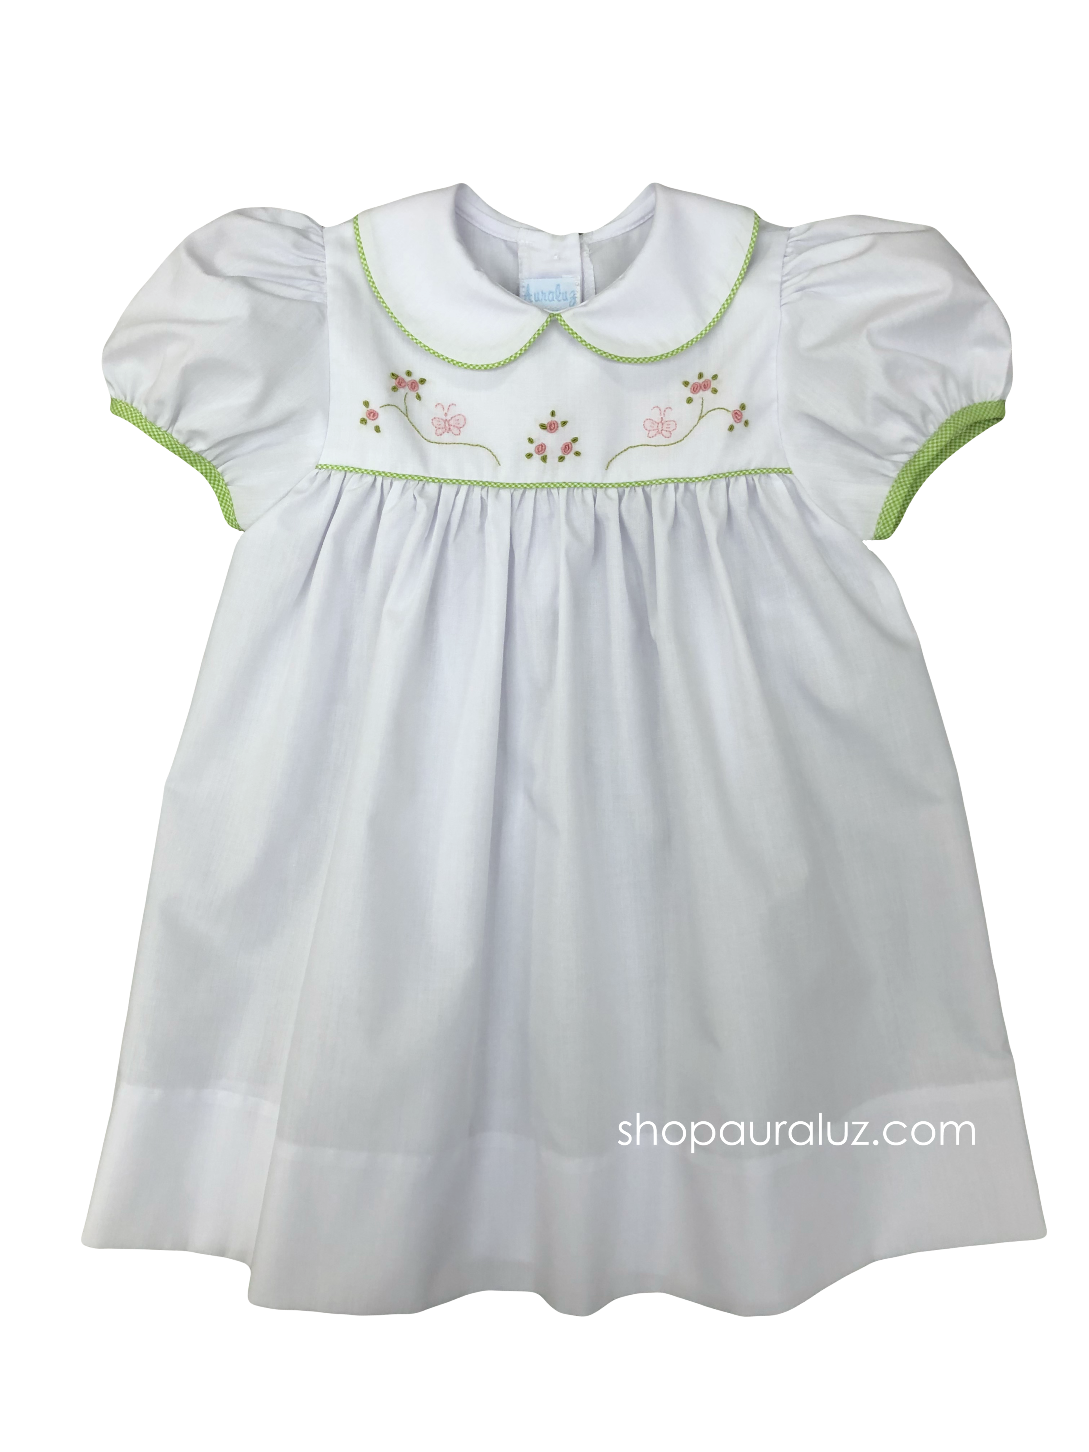 Auraluz Dress...White with lime check trim and embroidered flowers